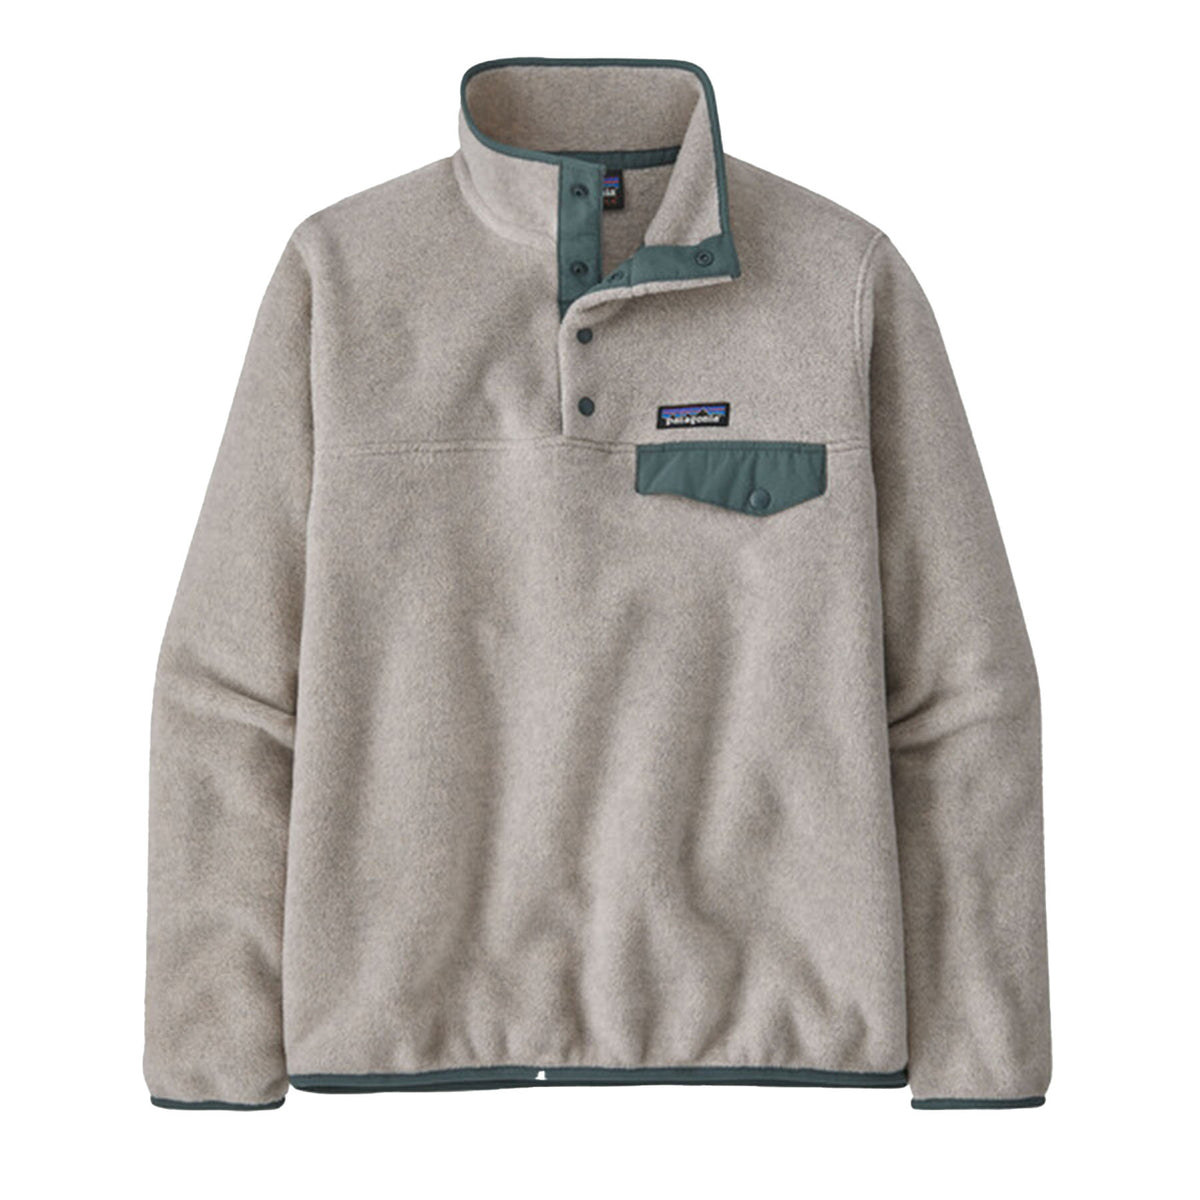 Patagonia Women's Lightweight Synch Snap-T Pullover 